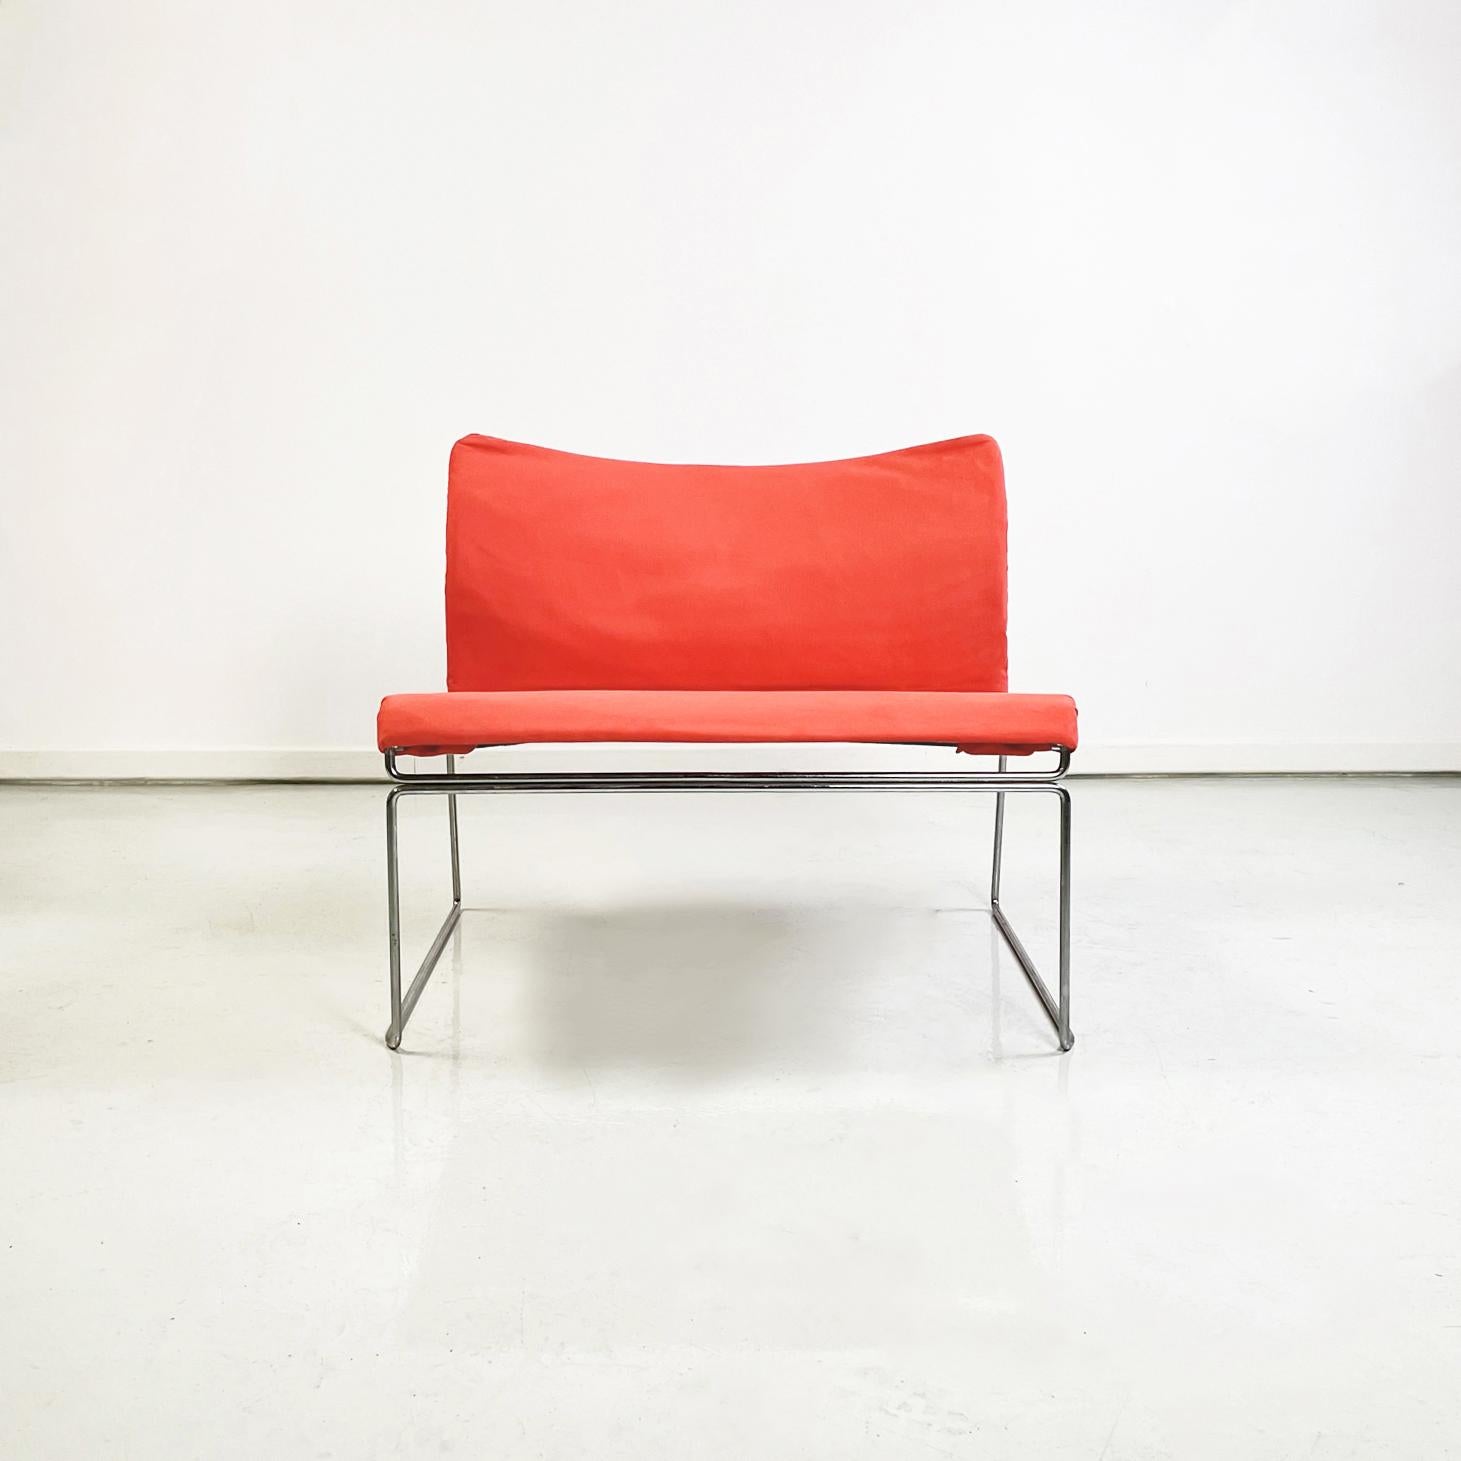 Italian modern Coral armchair mod. Saghi by Kazuhide Takahama for Gavina, 1970s
Iconic and elegant armchair mod. Saghi with steel rod structure. The seat and back are lightly padded and upholstered in coral red pink velvet.
Produced by Gavina in